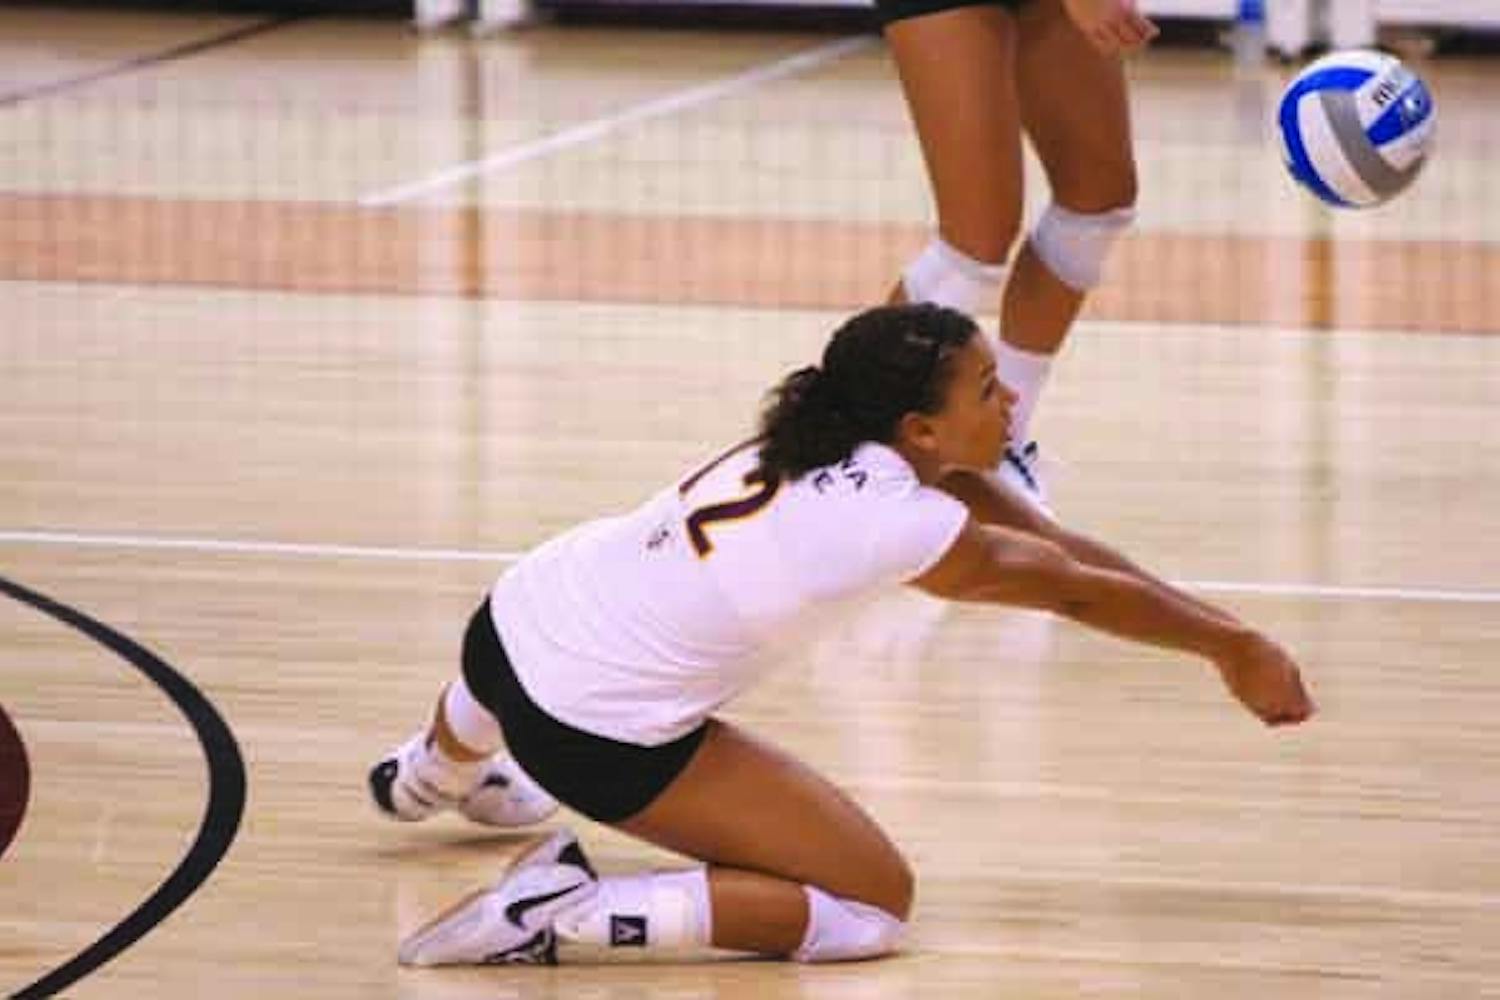 RECORD BREAKER: Senior outside hitter Sarah Reaves digs a ball during last weekendís ASU Sheraton Classic.  Reaves moved into fifth all time on ASUís kills list after hitting 19 kills against High Point Friday. (Photo by Scott Stuk)